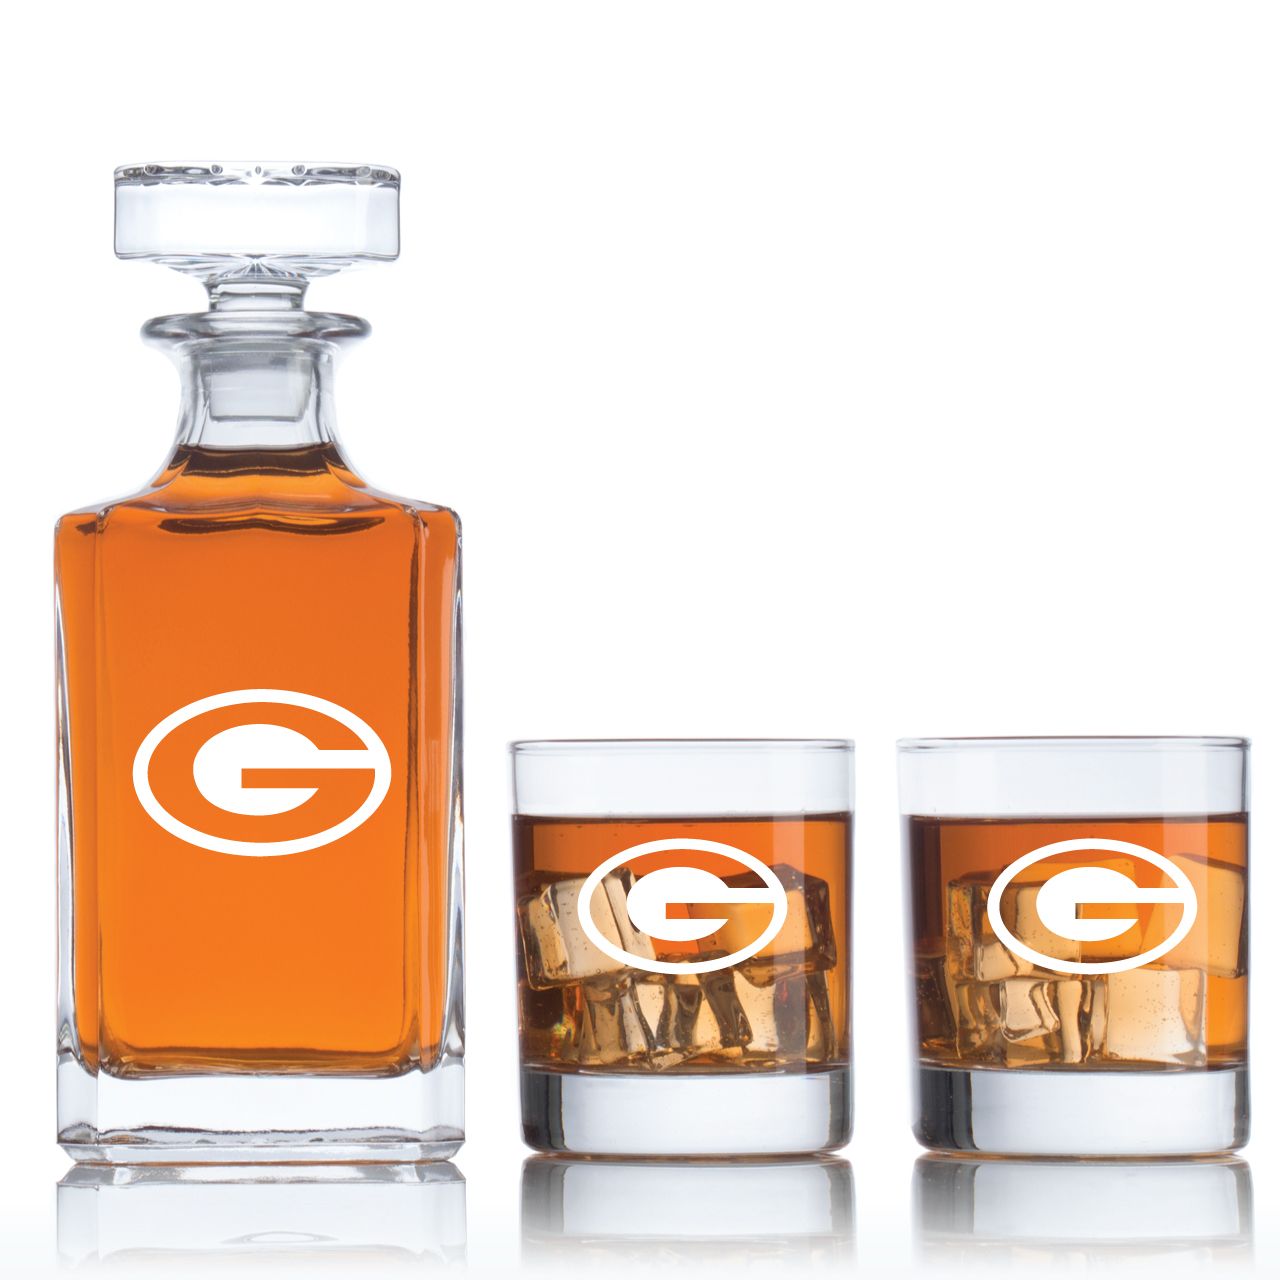 Green Bay Packers Football Fanatic Gift Ideas Classic